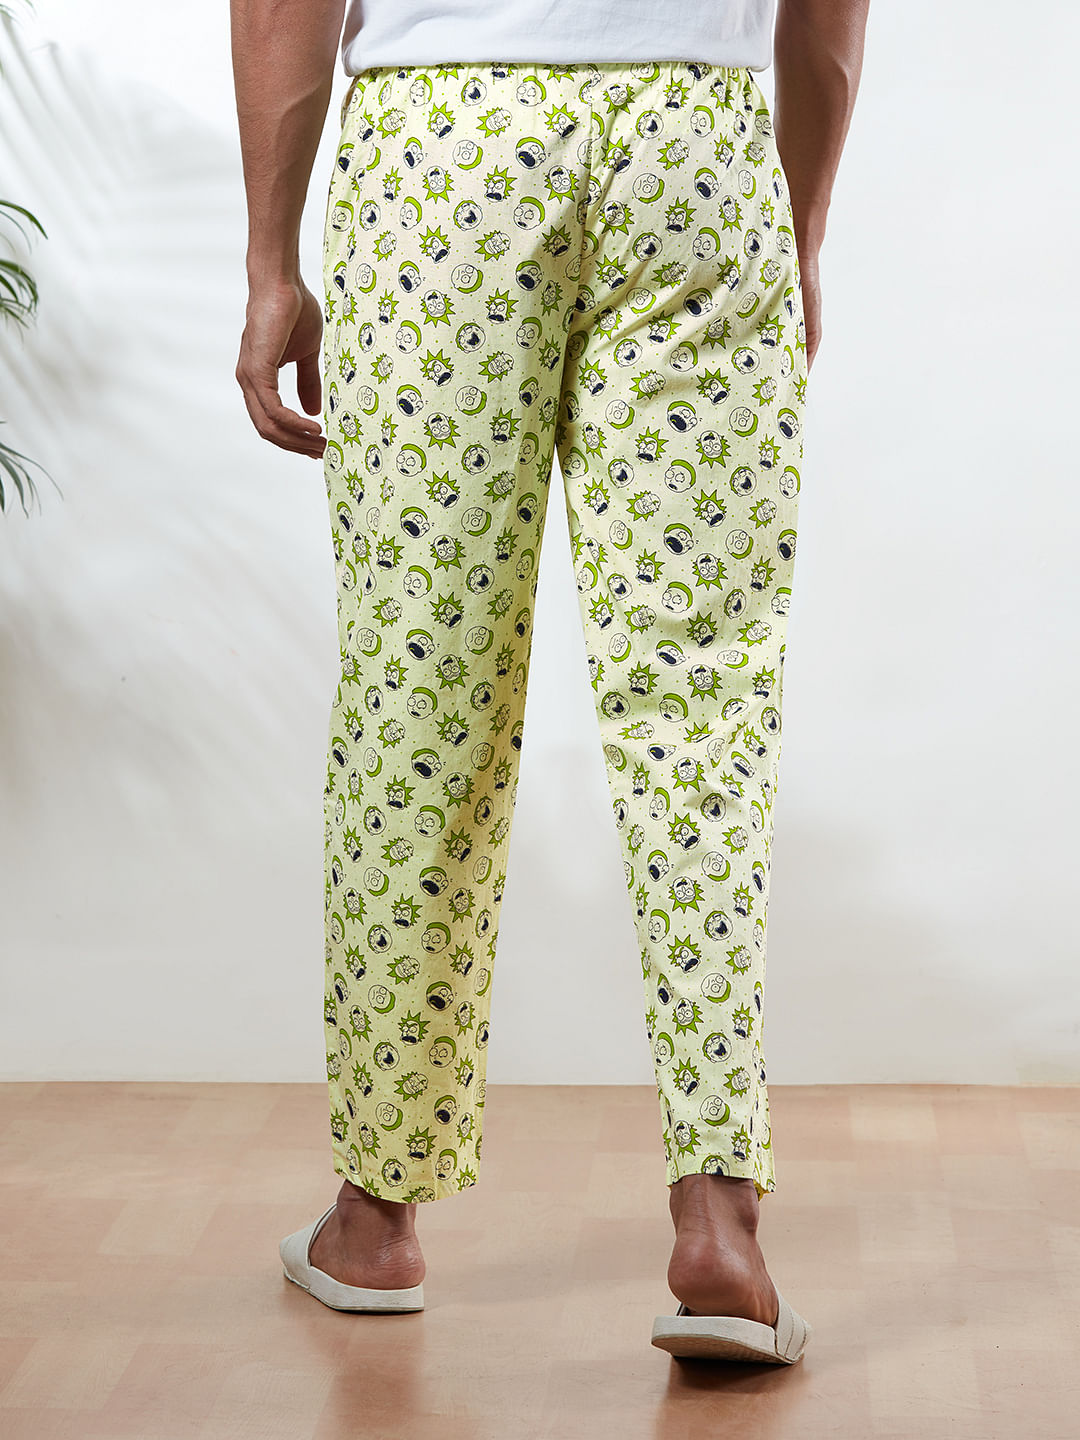 Buy Rick And Morty Pajamas online at The Souled Store.